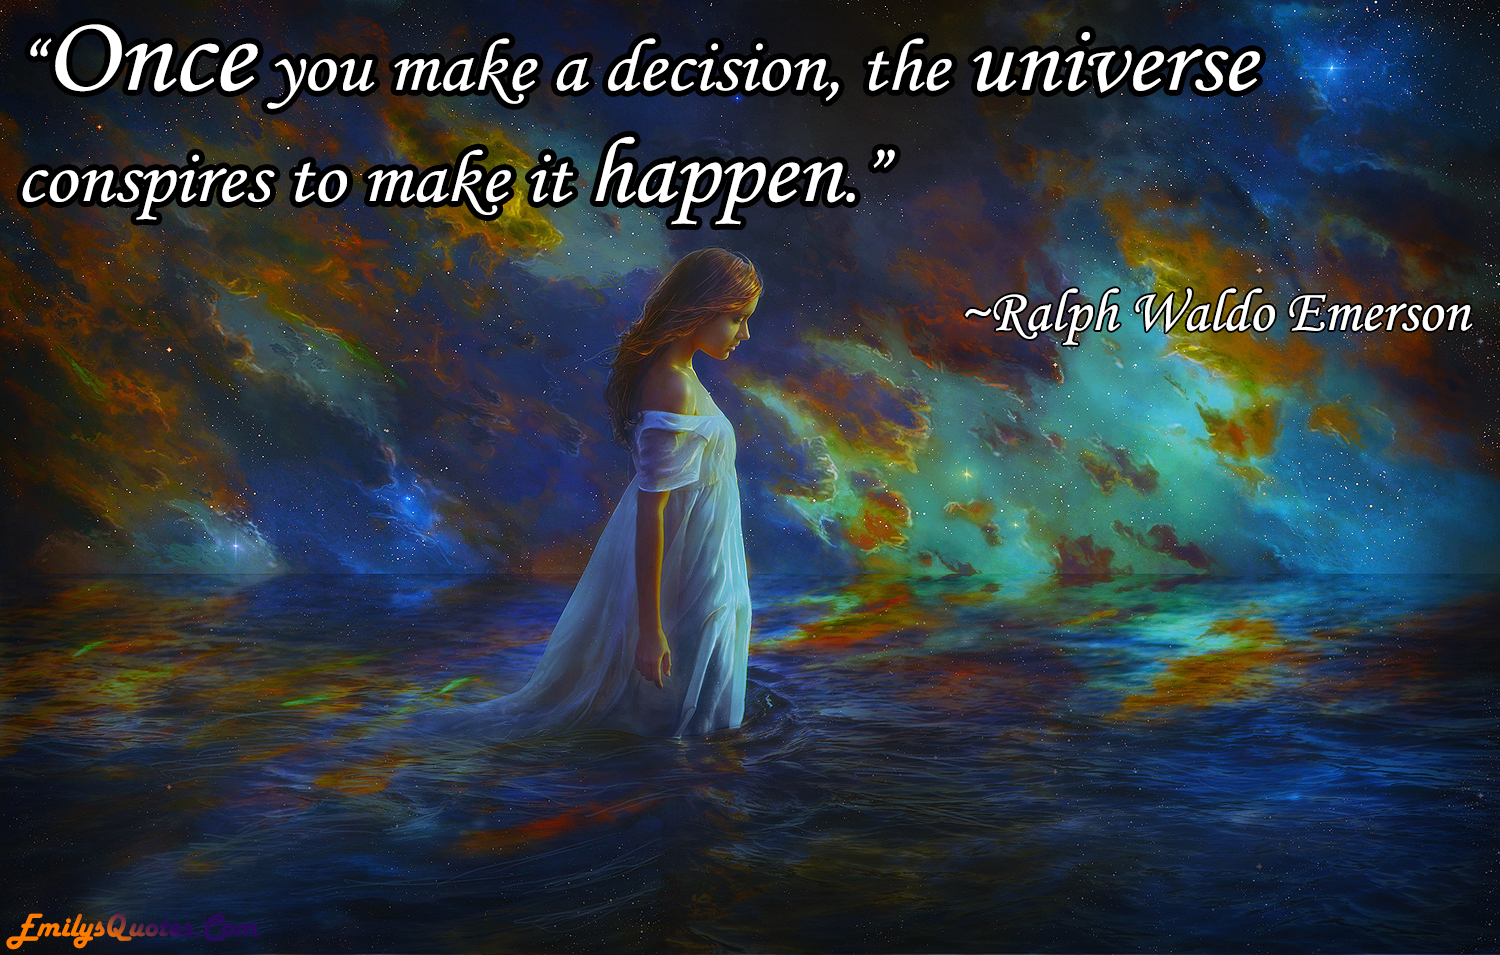 Once you make a decision, the universe conspires to make it happen